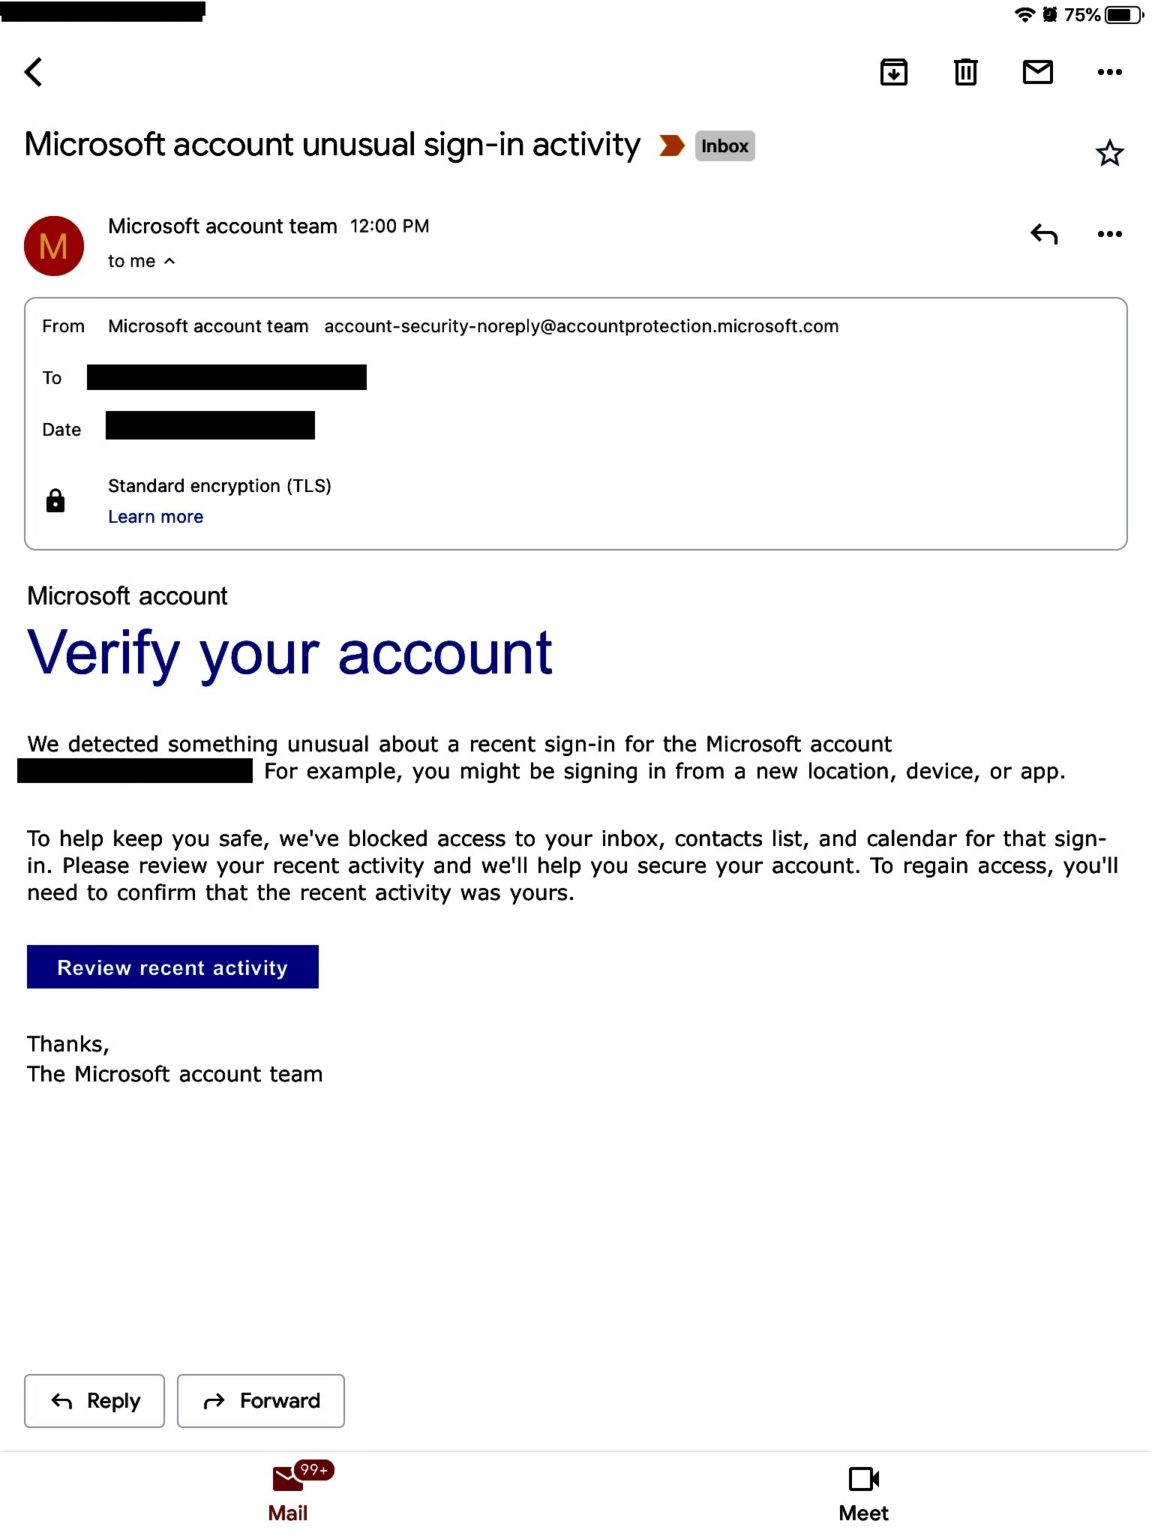 microsoft unusual sign in activity email for gmail account